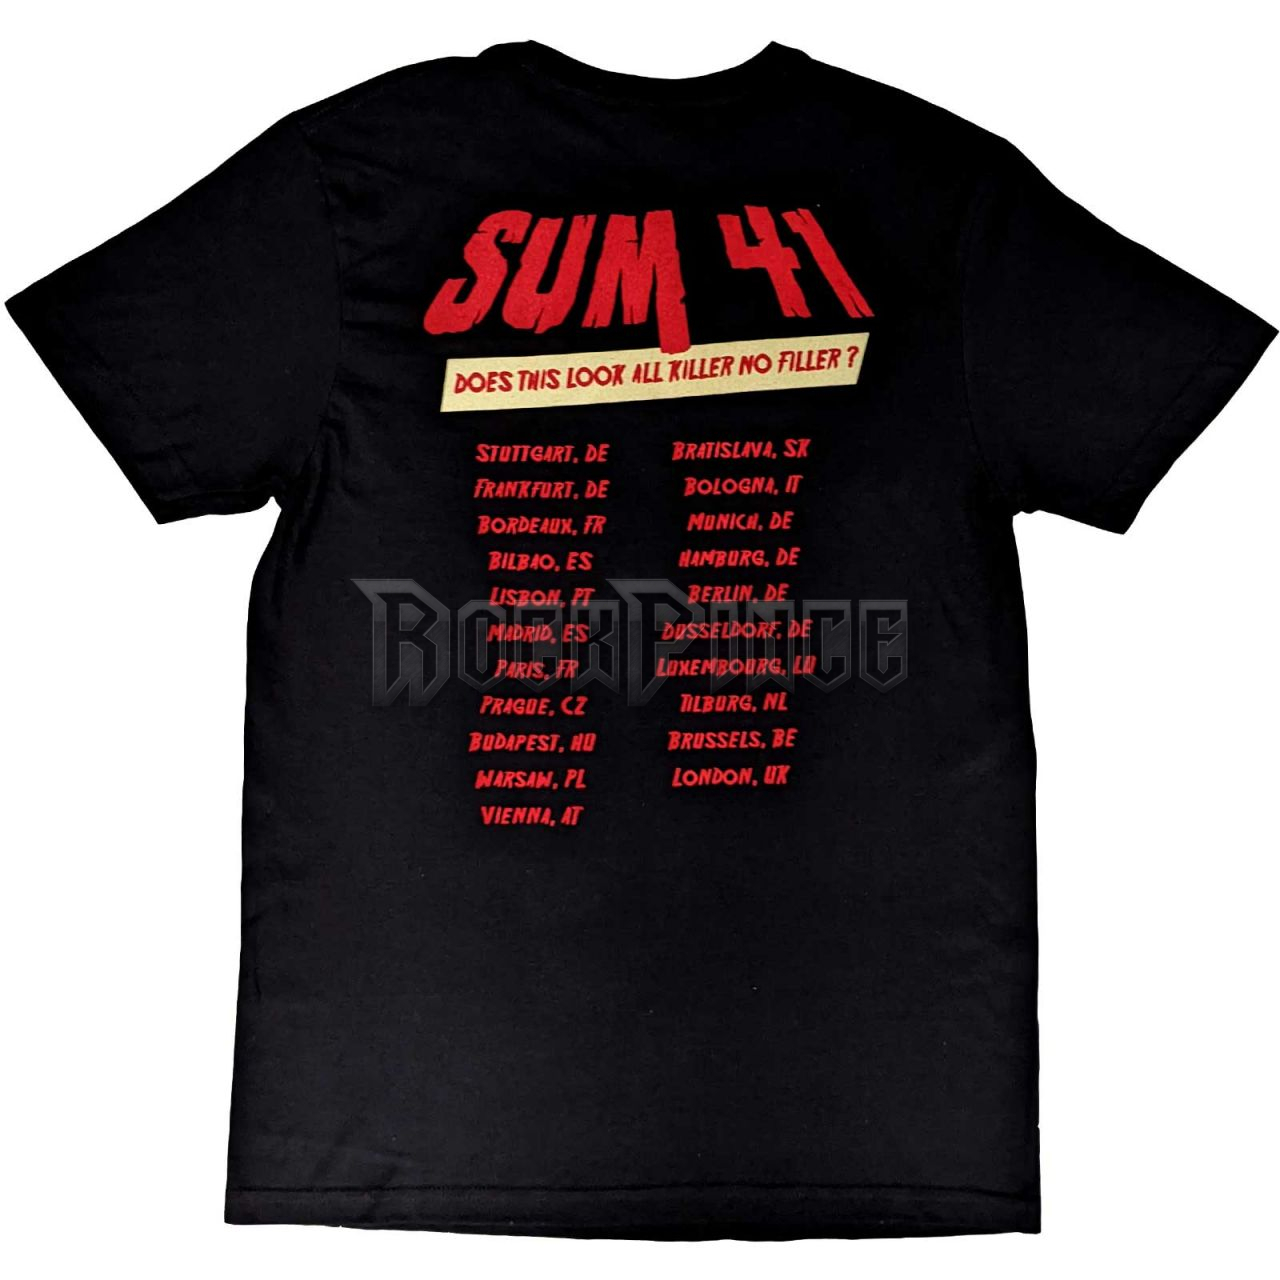 Sum 41 - Does This Look Like All Killer No Filler European Tour 2022 - unisex póló - SUMTS09MB